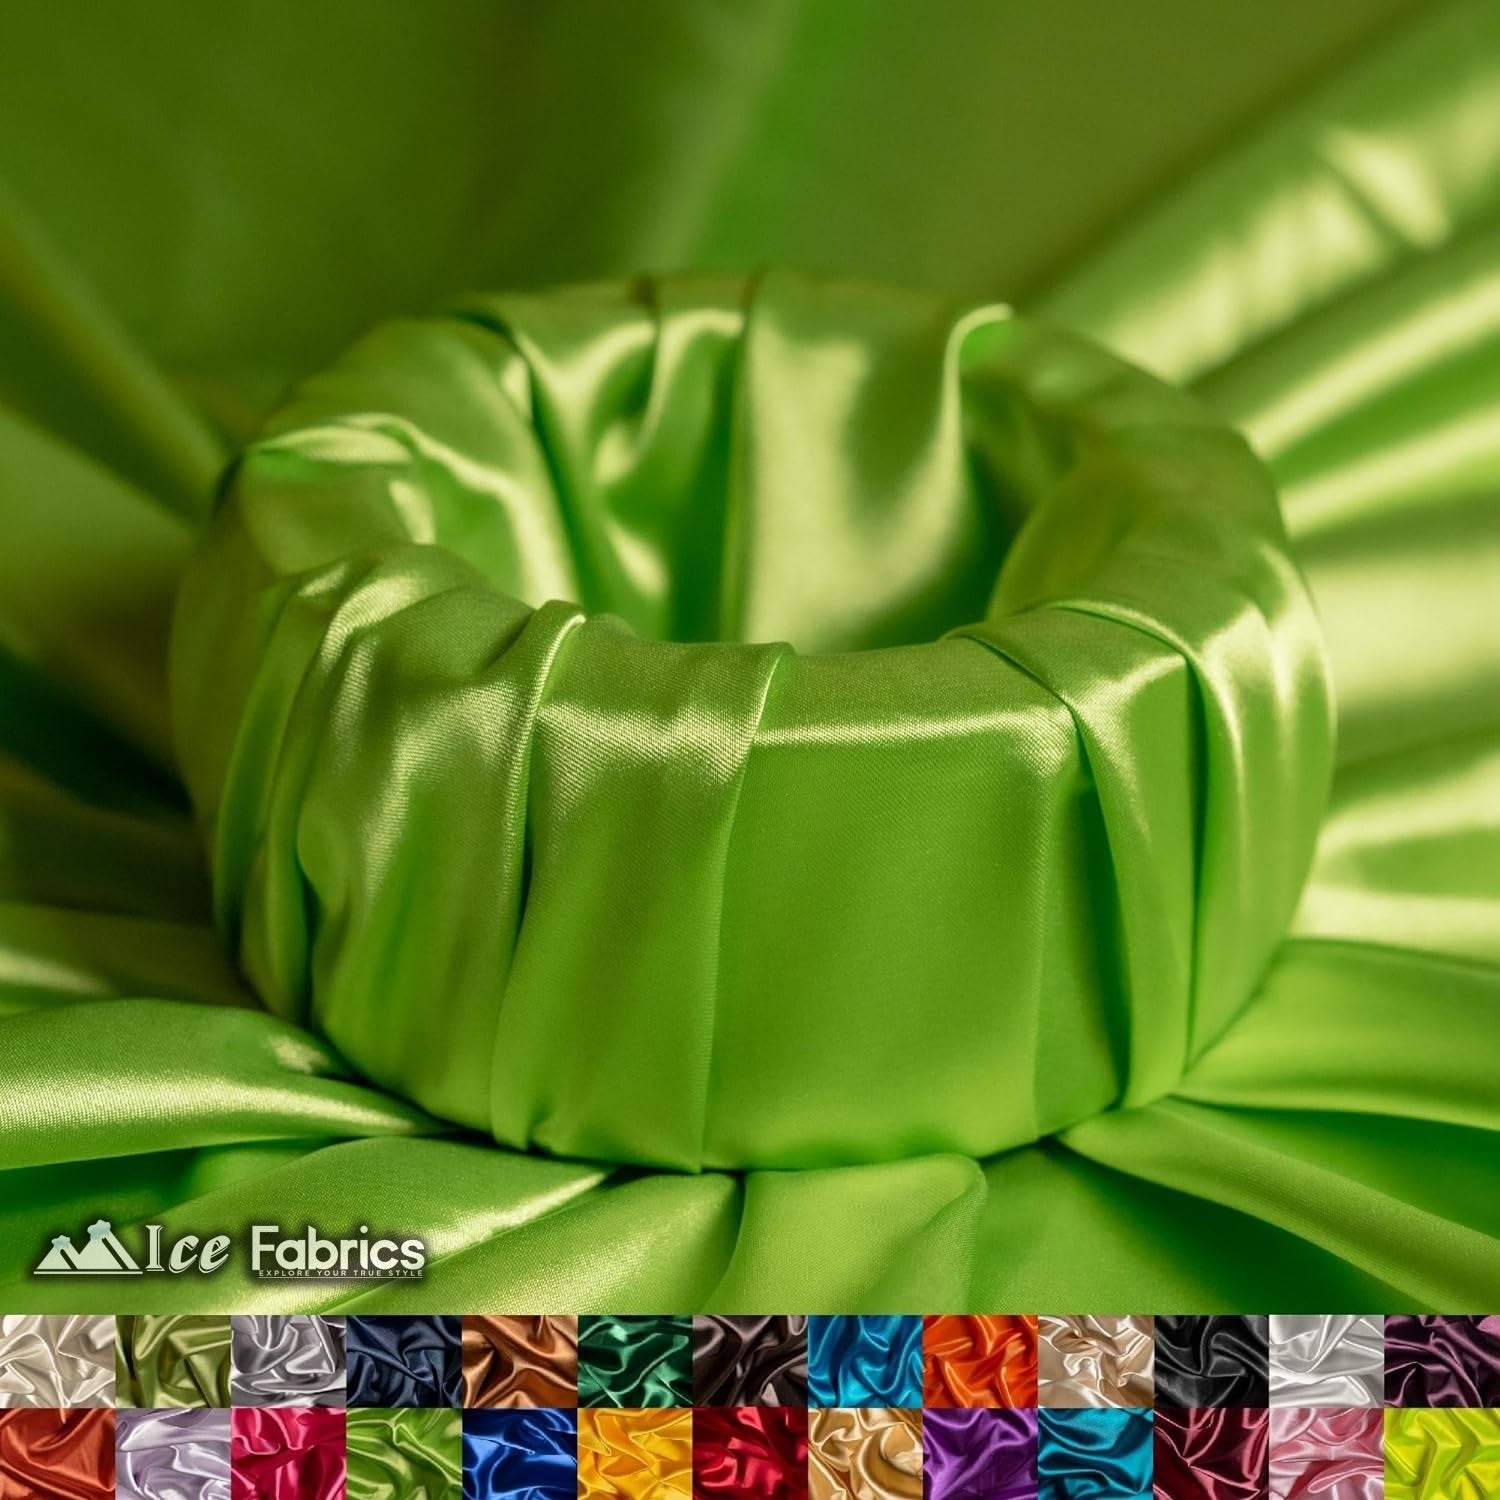 New Shiny Lime Green Charmeuse Stretch Satin FabricICE FABRICSICE FABRICSBy The Yard (60" Wide)New Shiny Lime Green Charmeuse Stretch Satin Fabric